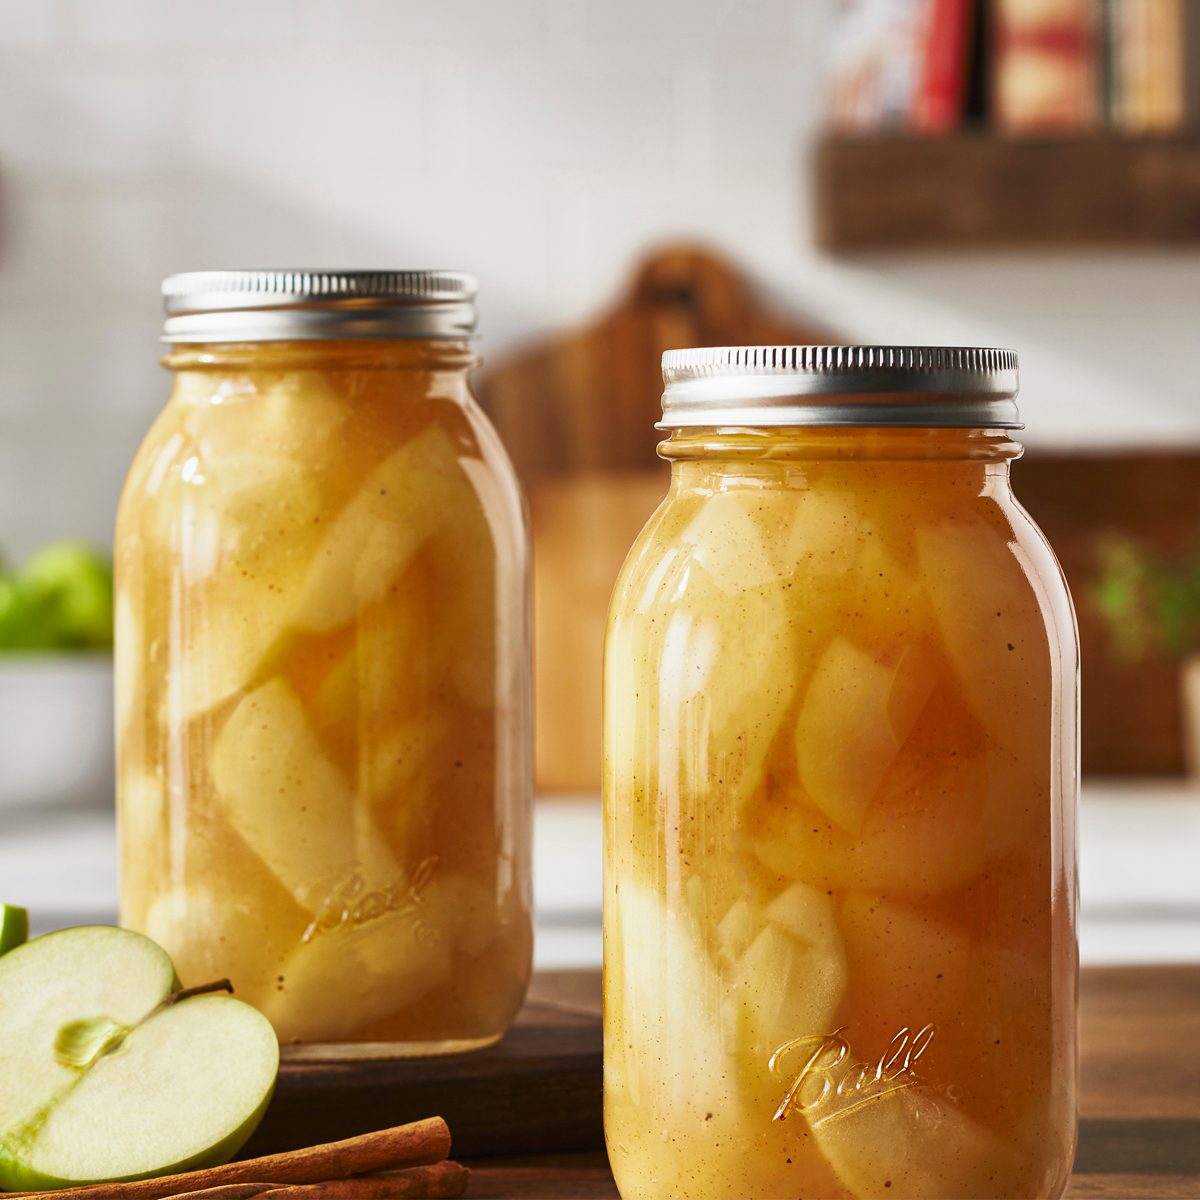 https://www.tasteofhome.com/wp-content/uploads/2020/08/Ball-Smooth-Sided-Glass-Mason-Jars-with-Lids-Bands-Wide-Mouth.jpg?fit=700%2C700